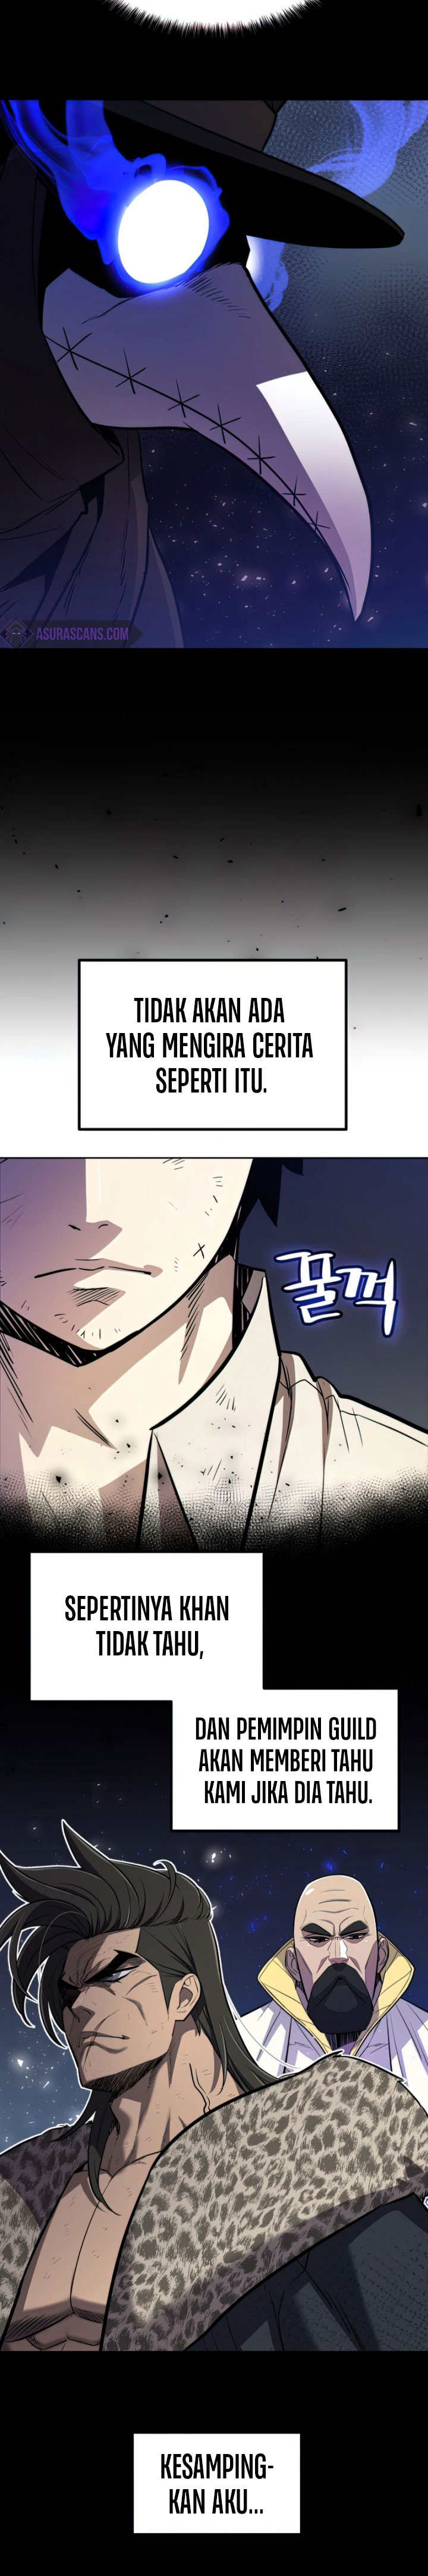 Overpowered Sword Chapter 35